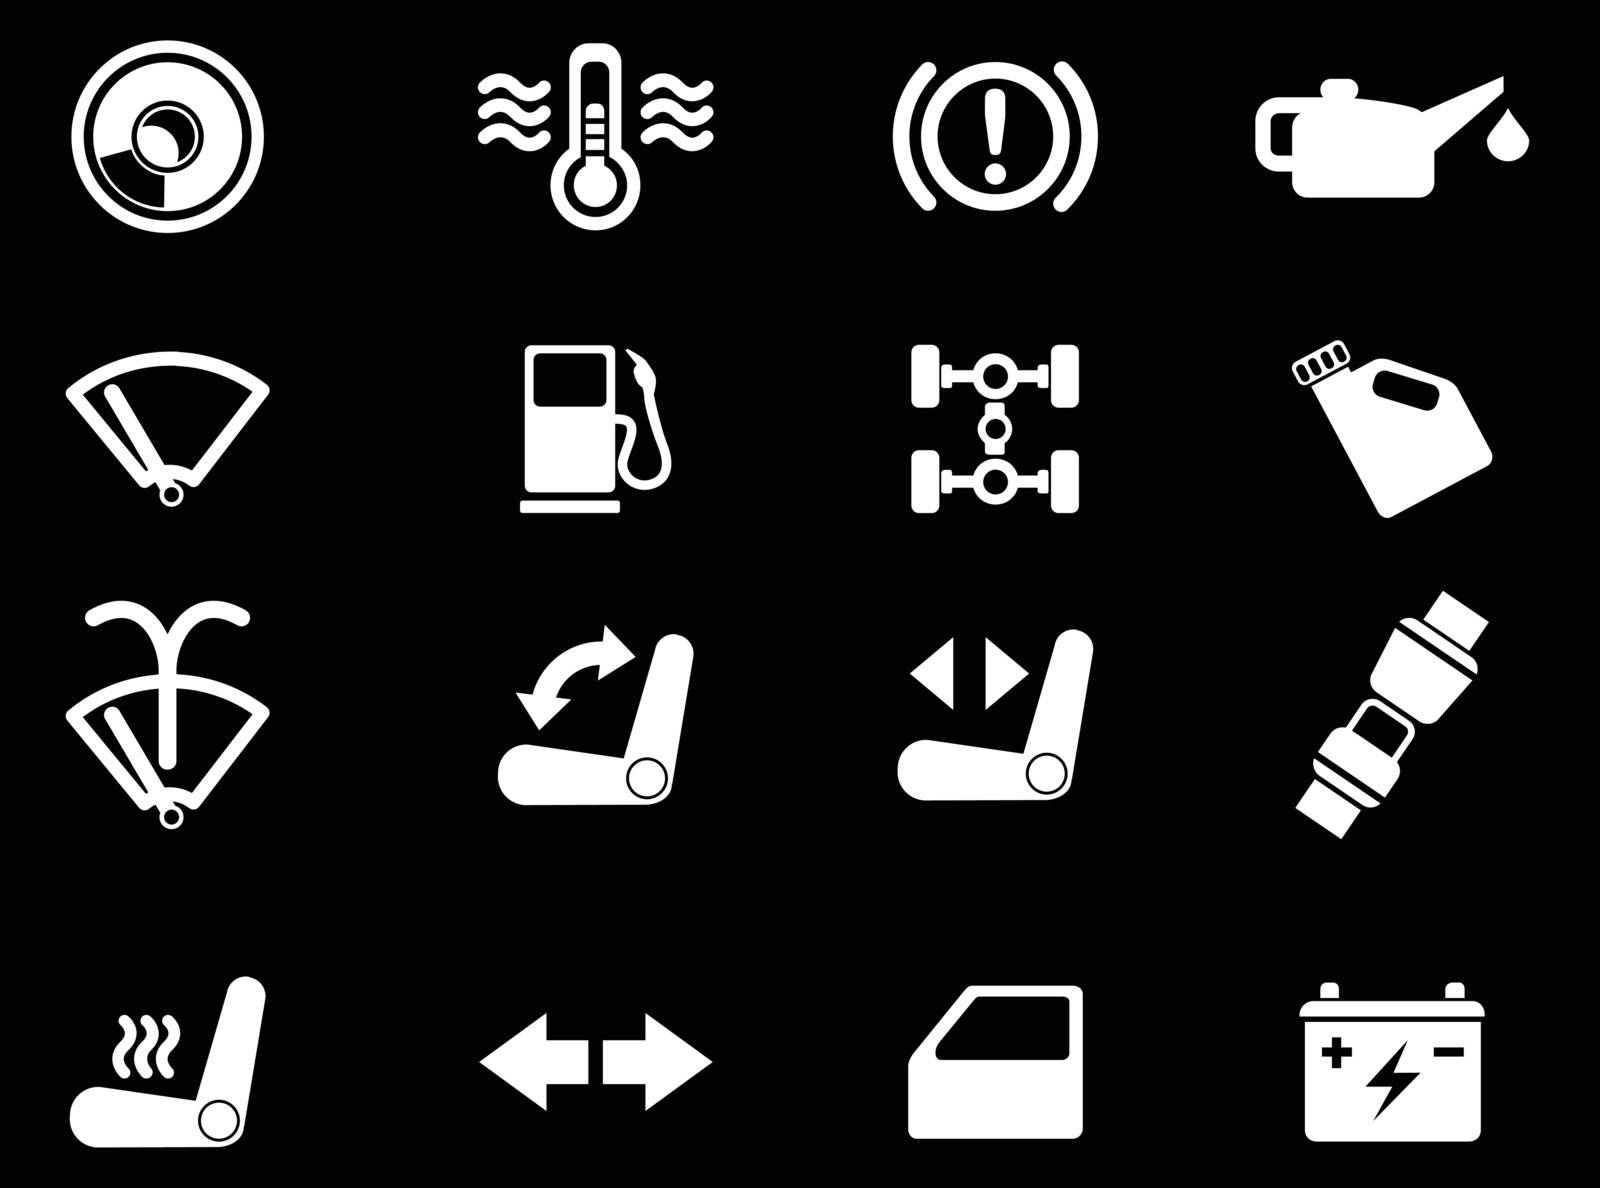 Car interface simply symbol for web icons and user interface